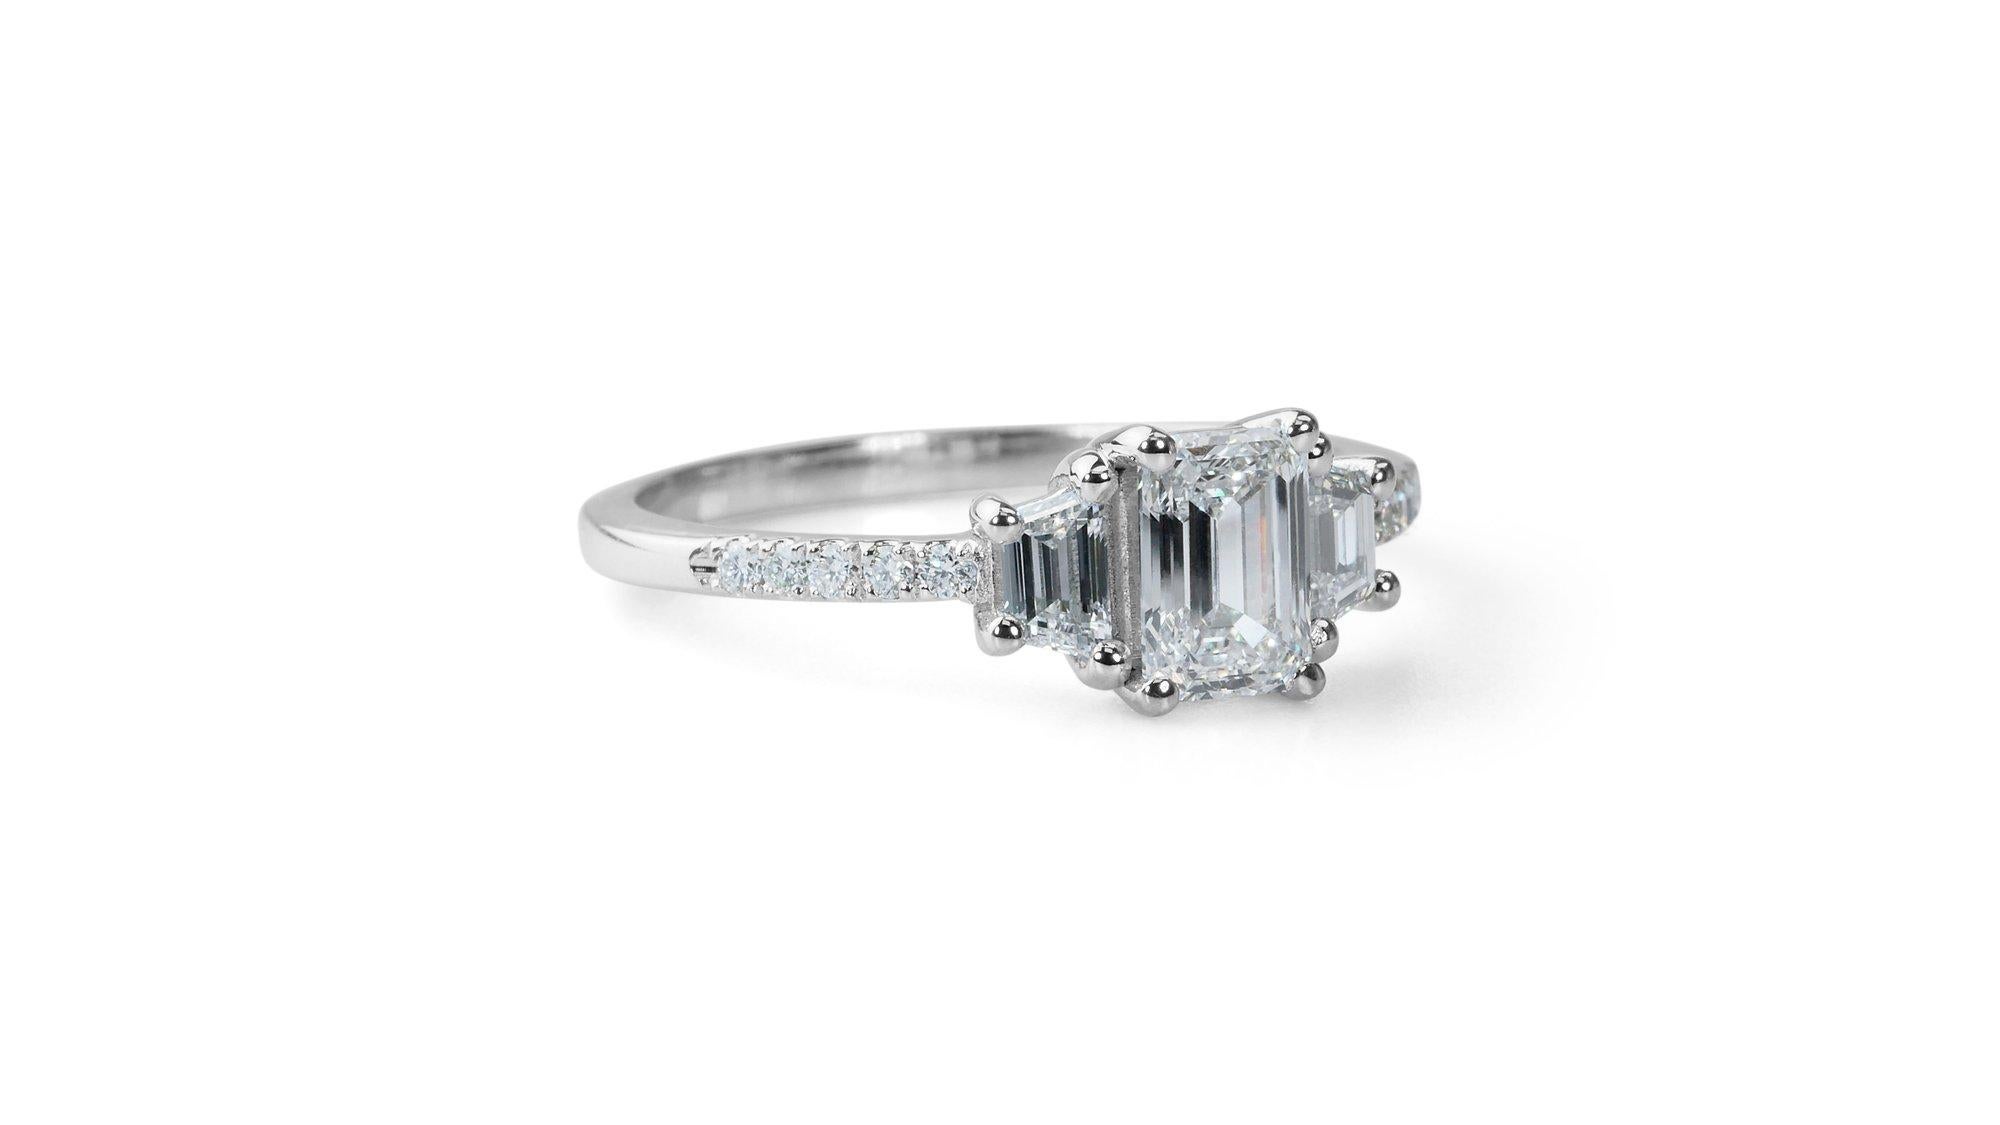 Gorgeous 18k White Gold Natural Diamond 3 Stone Ring w/1.47 ct - GIA Certified 

This exquisite three-stone ring features a stunning emerald-cut at its center with 1.00 carat. And 2 elegant baguette diamonds totaling 0.40 carats together with 10